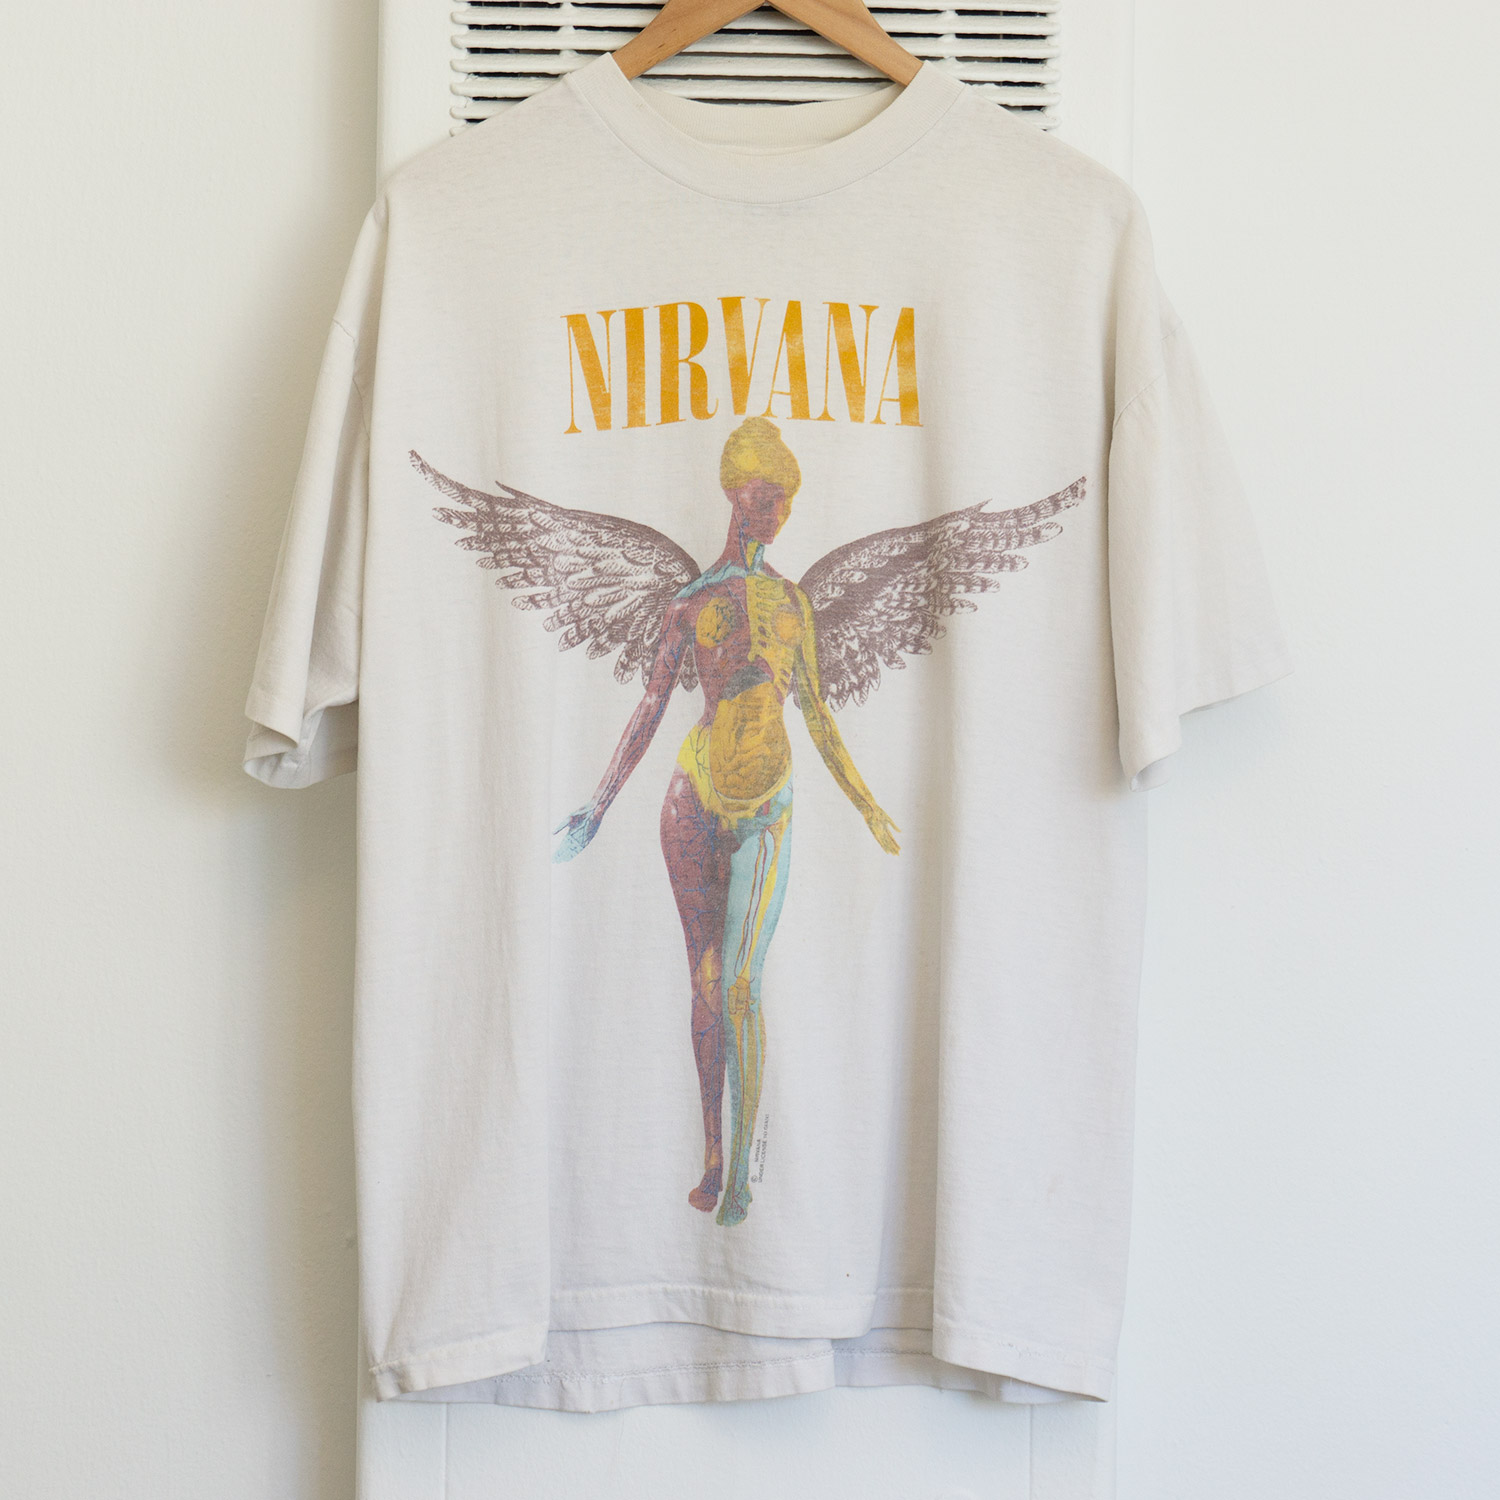 Vintage Nirvana In Utero T-shirt with Giant Brand Neck Tag, Front